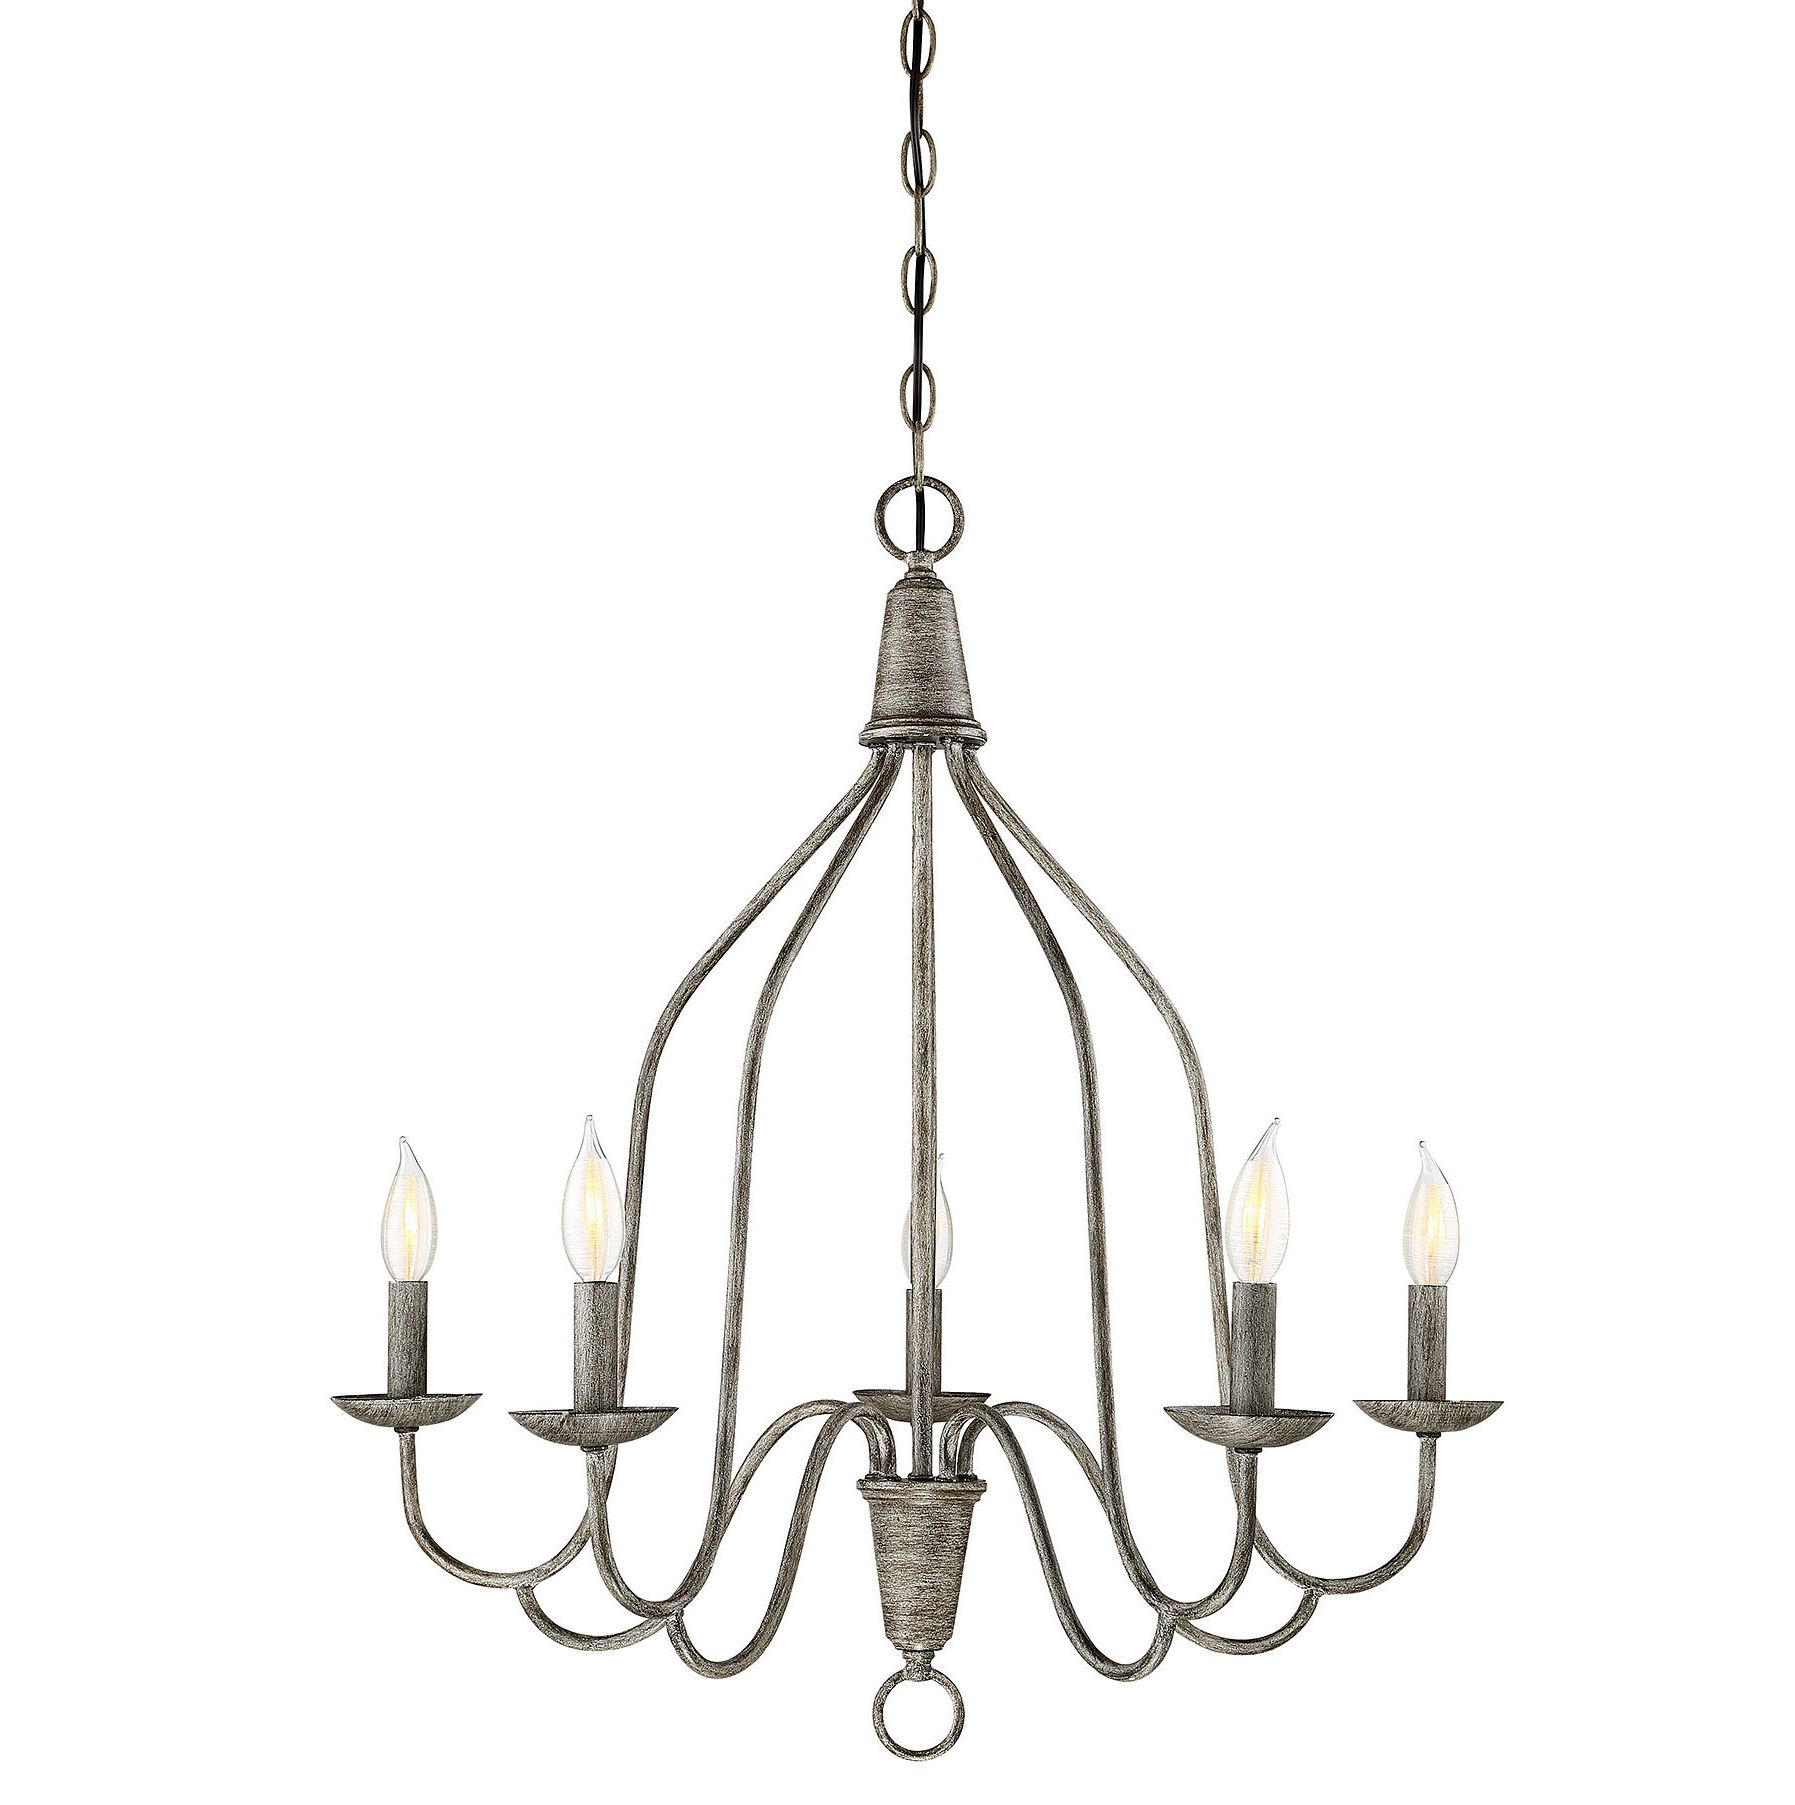 Geeta 5 Light Candle Style Chandelier With Regard To Favorite Berger 5 Light Candle Style Chandeliers (View 9 of 25)